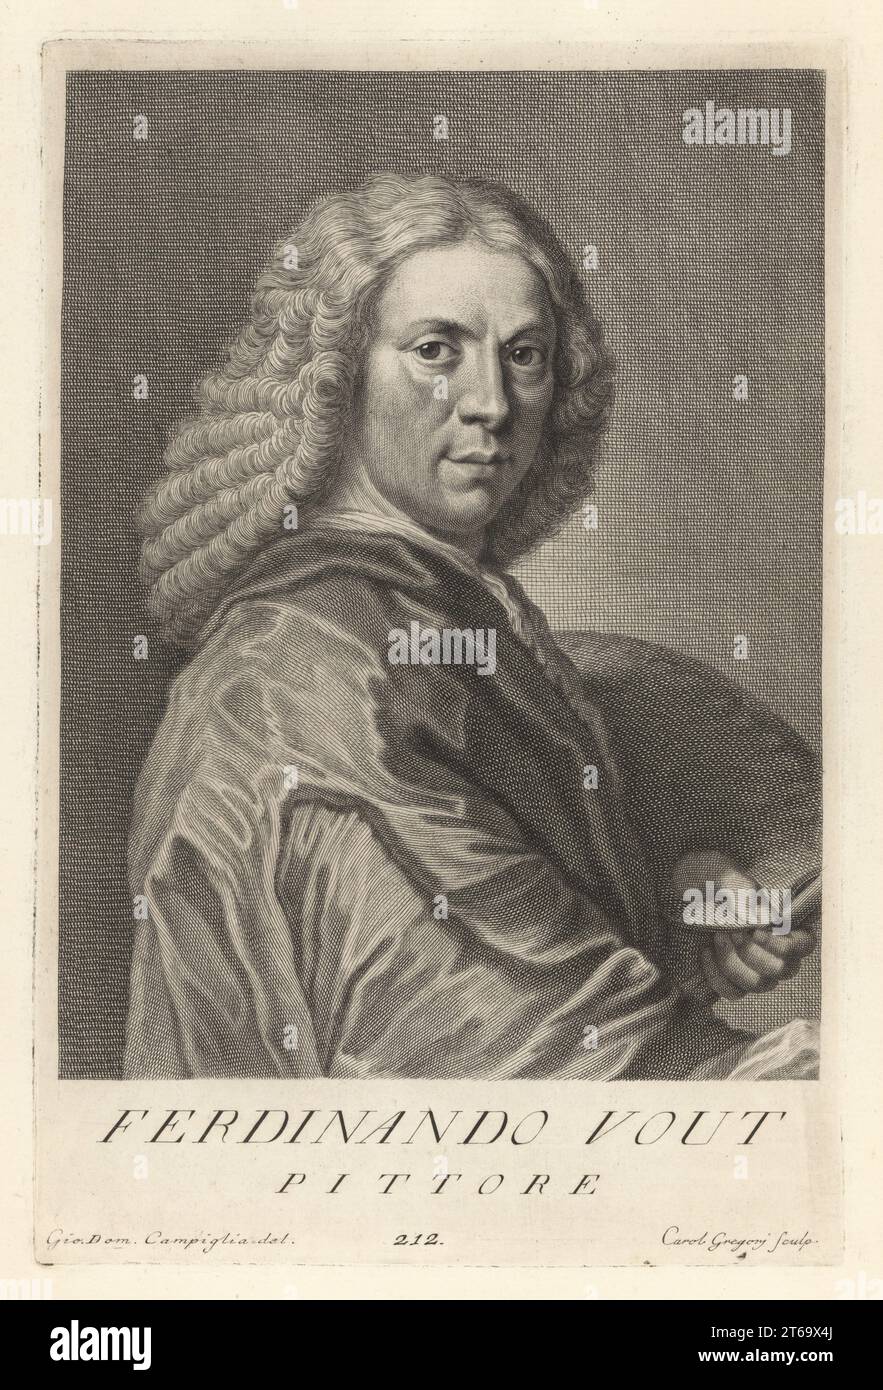 Jacob Ferdinand Voet or Jakob Ferdinand Voet, Flemish portrait painter, c.1639-1689. In powdered wig and mantle, holding palette and paintbrushes. Ferdinando Vout, Pittore. Copperplate engraving by Carlo Gregori after Giovanni Domenico Campiglia after a self portrait by the artist from Francesco Moucke's Museo Florentino (Museum Florentinum), Serie di Ritratti de Pittori (Series of Portraits of Painters) stamperia Mouckiana, Florence, 1752-62. Stock Photo